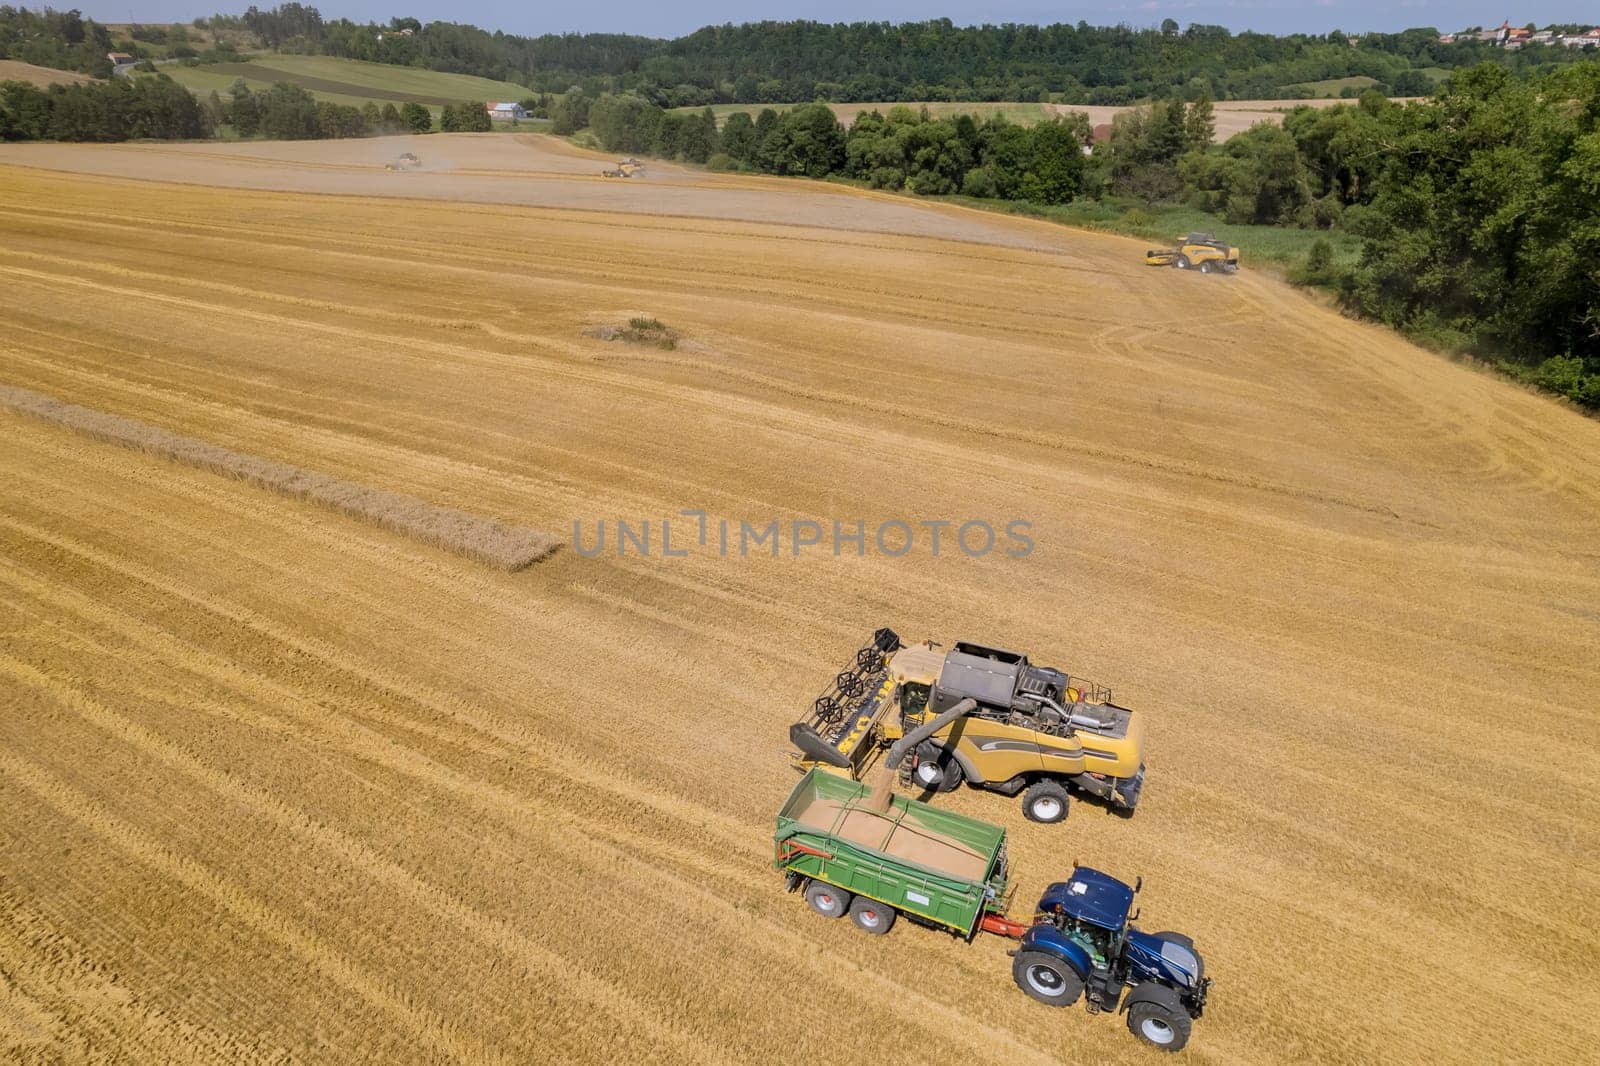 Wheat harvest is busy time for farmers as they employ combines to gather crops. by Yaroslav